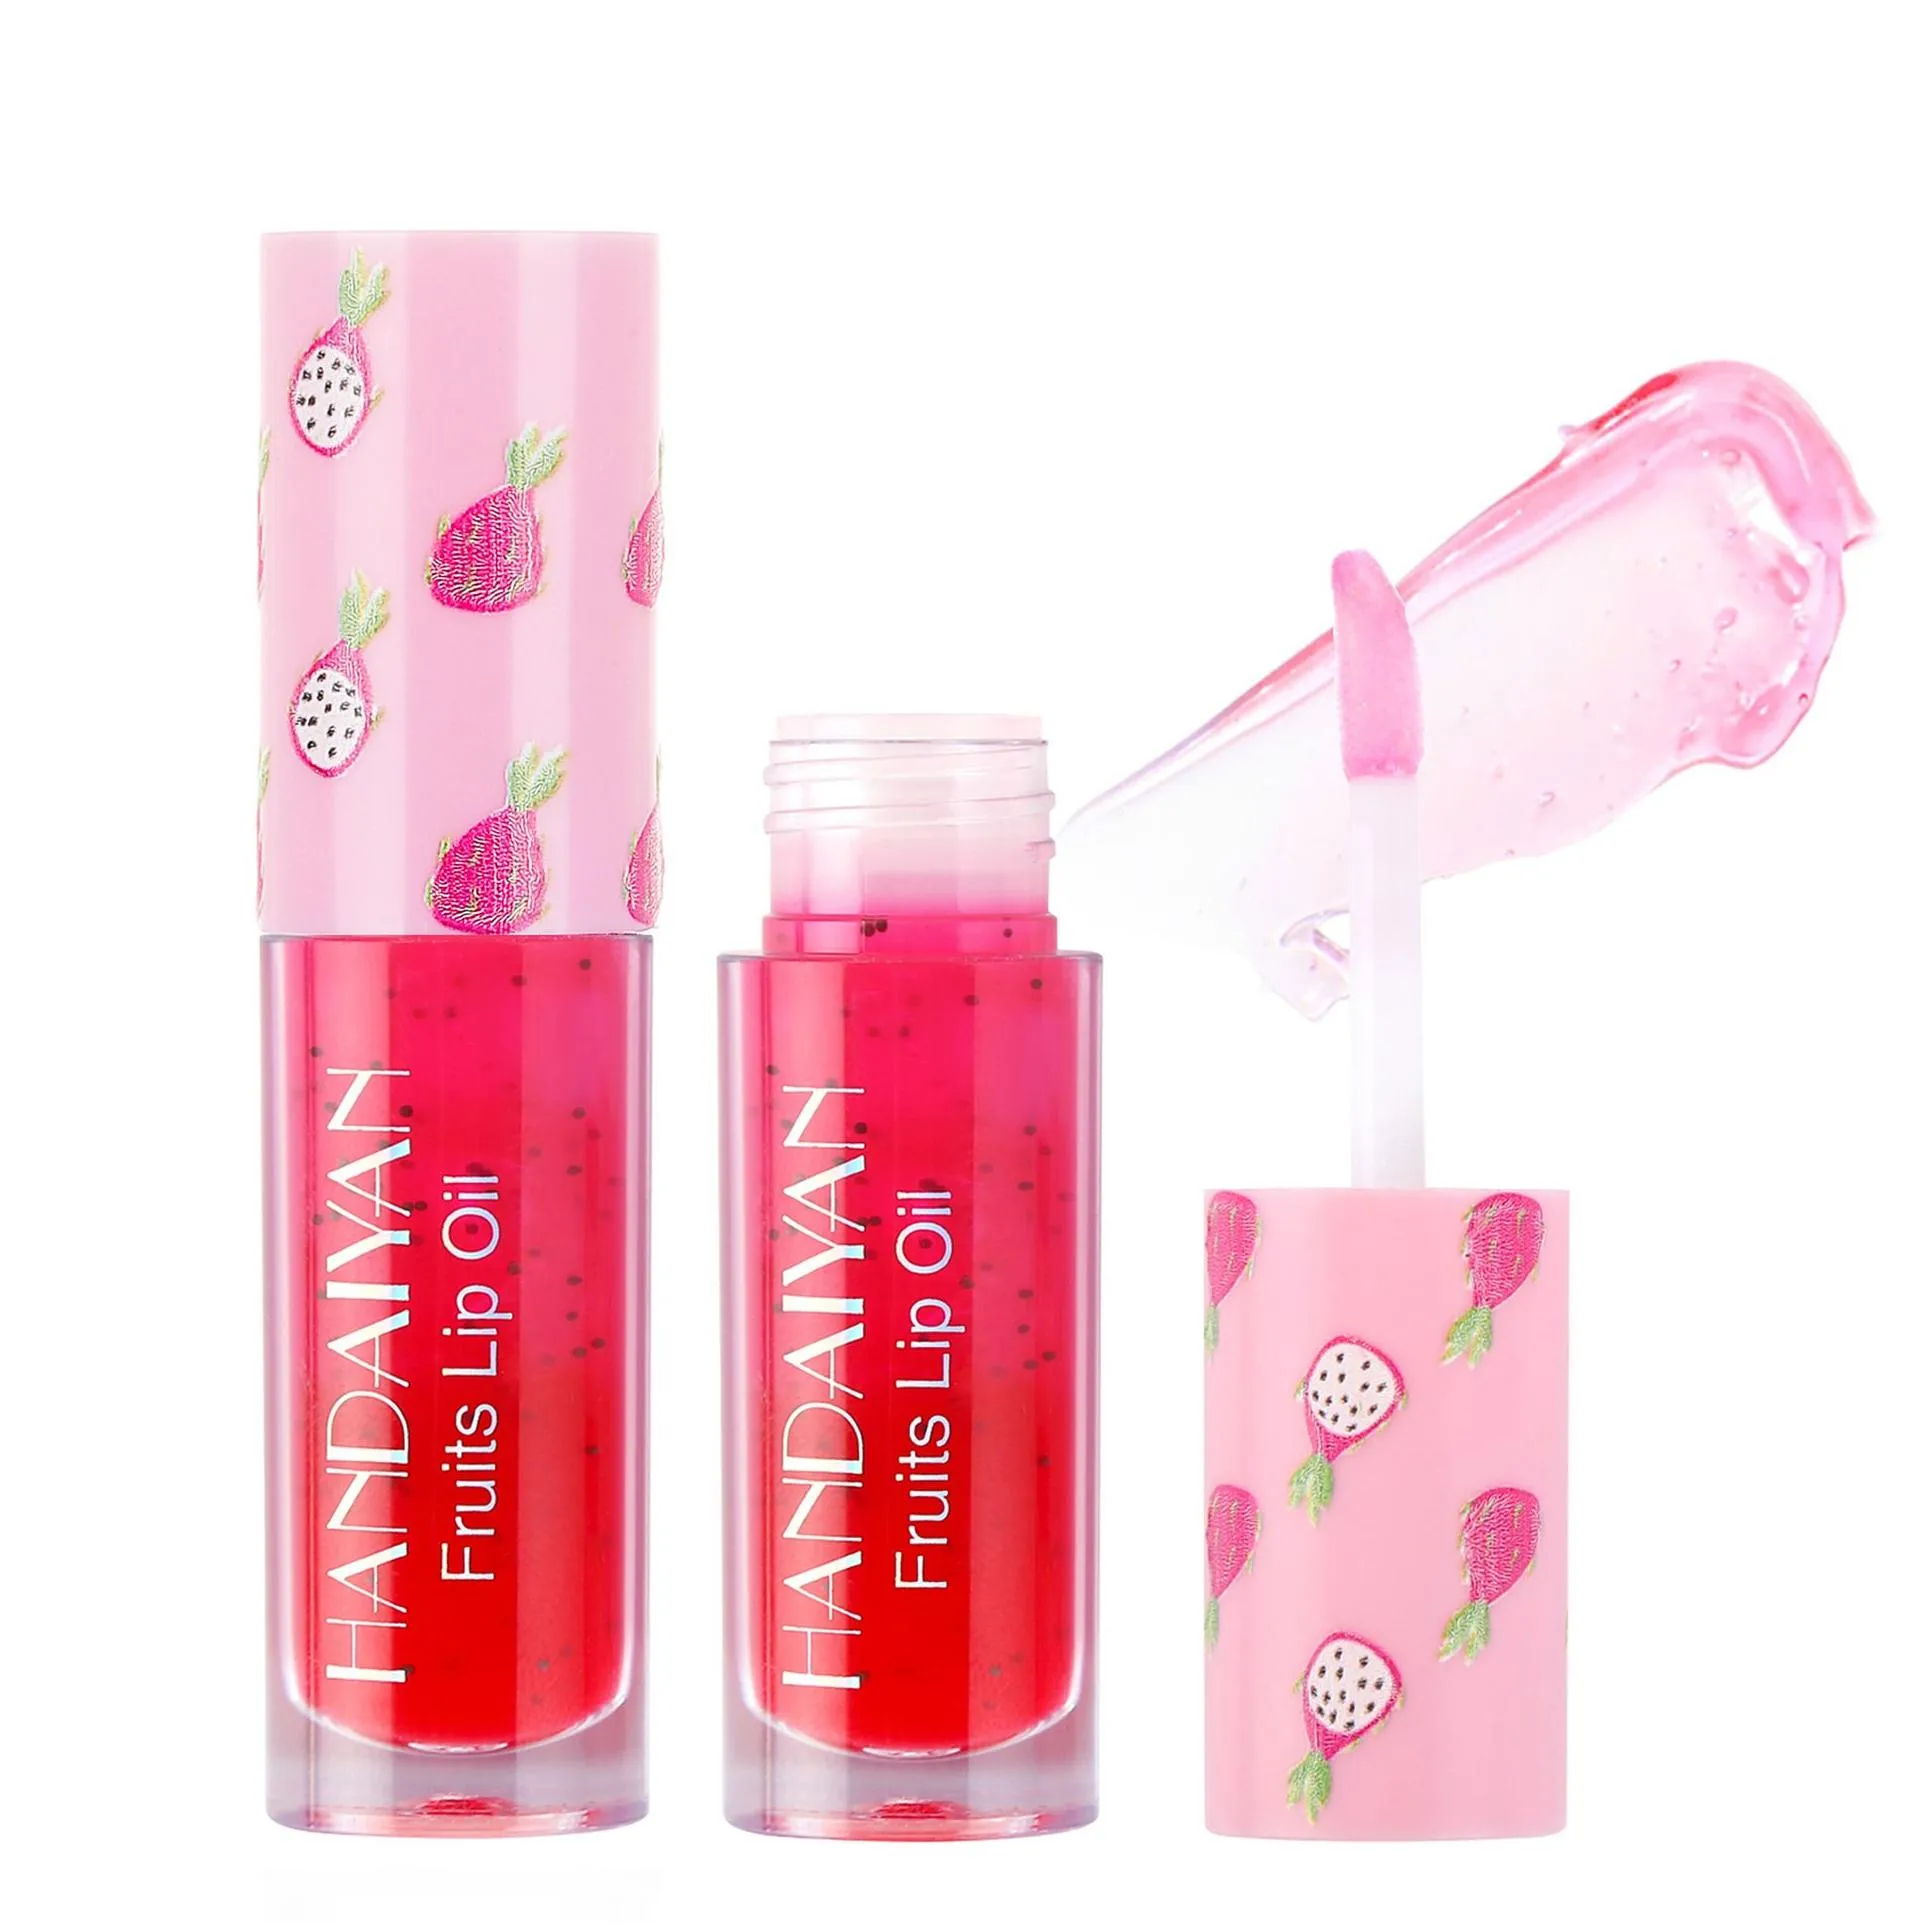 Lip Gloss Fruit Series Lip Oil Gloss Bk Glass Lips Moisturizing Transparent Balm Removing Dead Skin And Fading Lines Makeup Drop Deliv Dhi8H